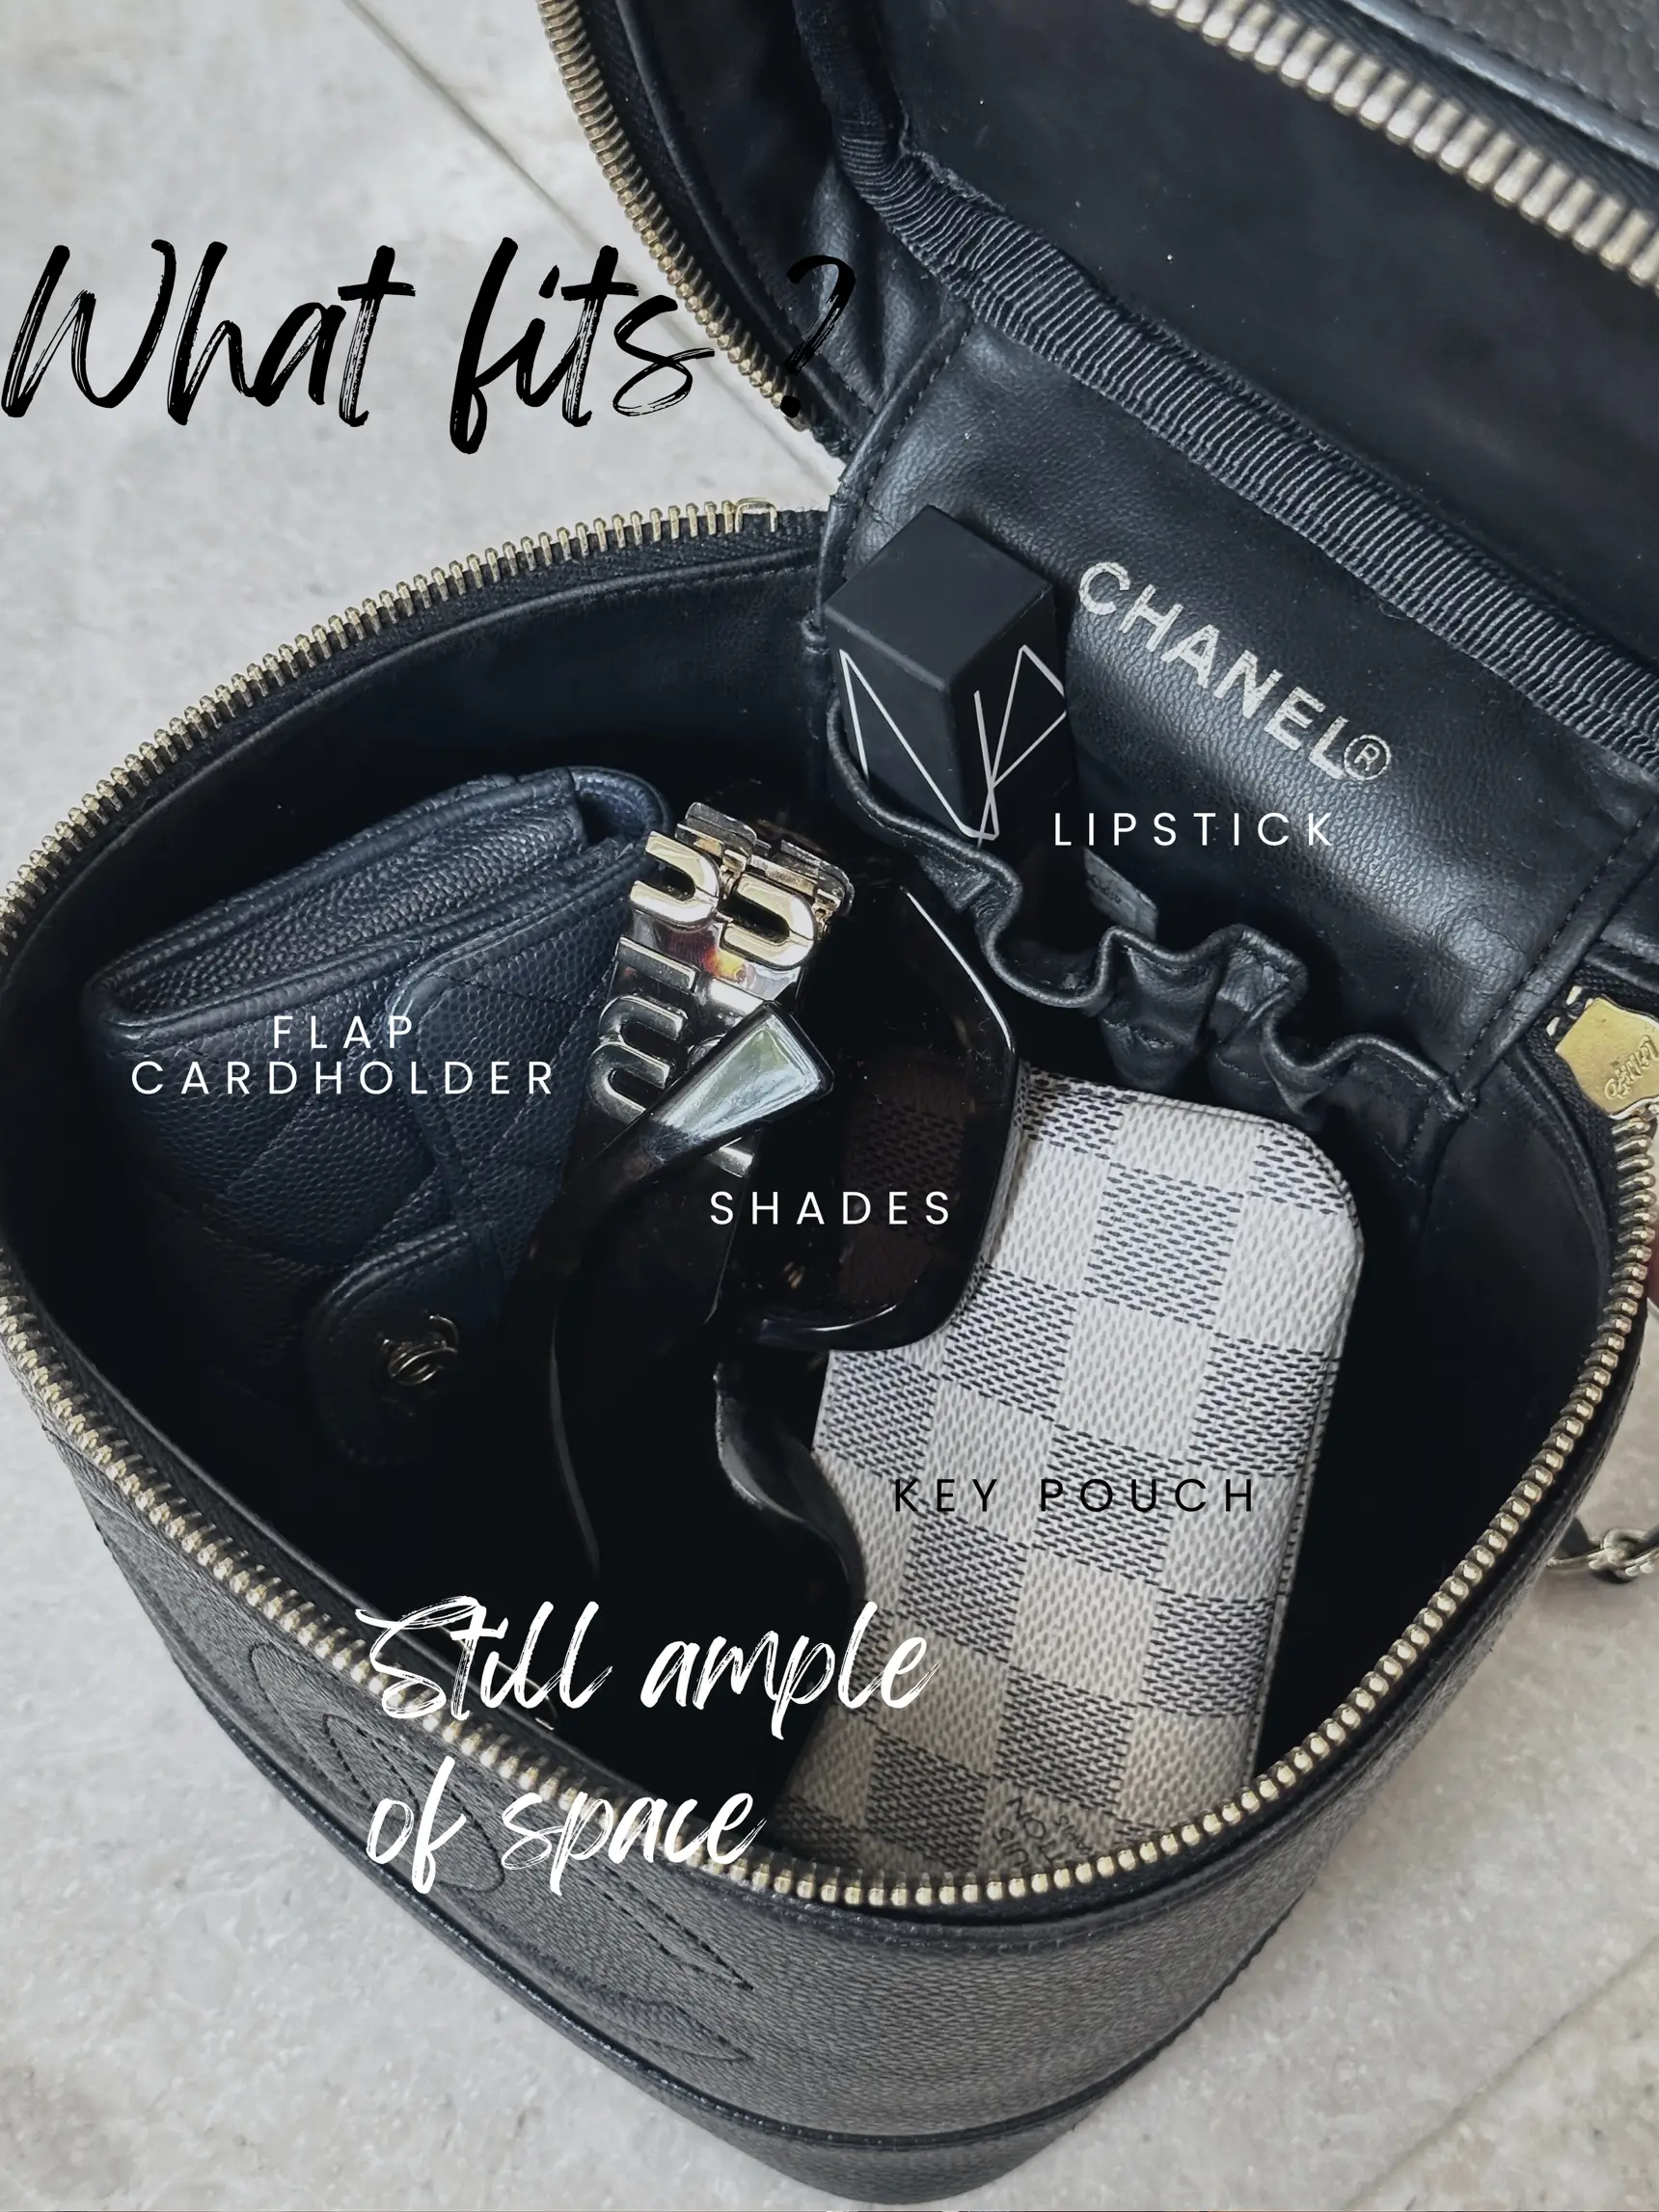 Chanel Vanity Case Review  Chanel vanity case, Coordinates outfits, Spring  fashion outfits